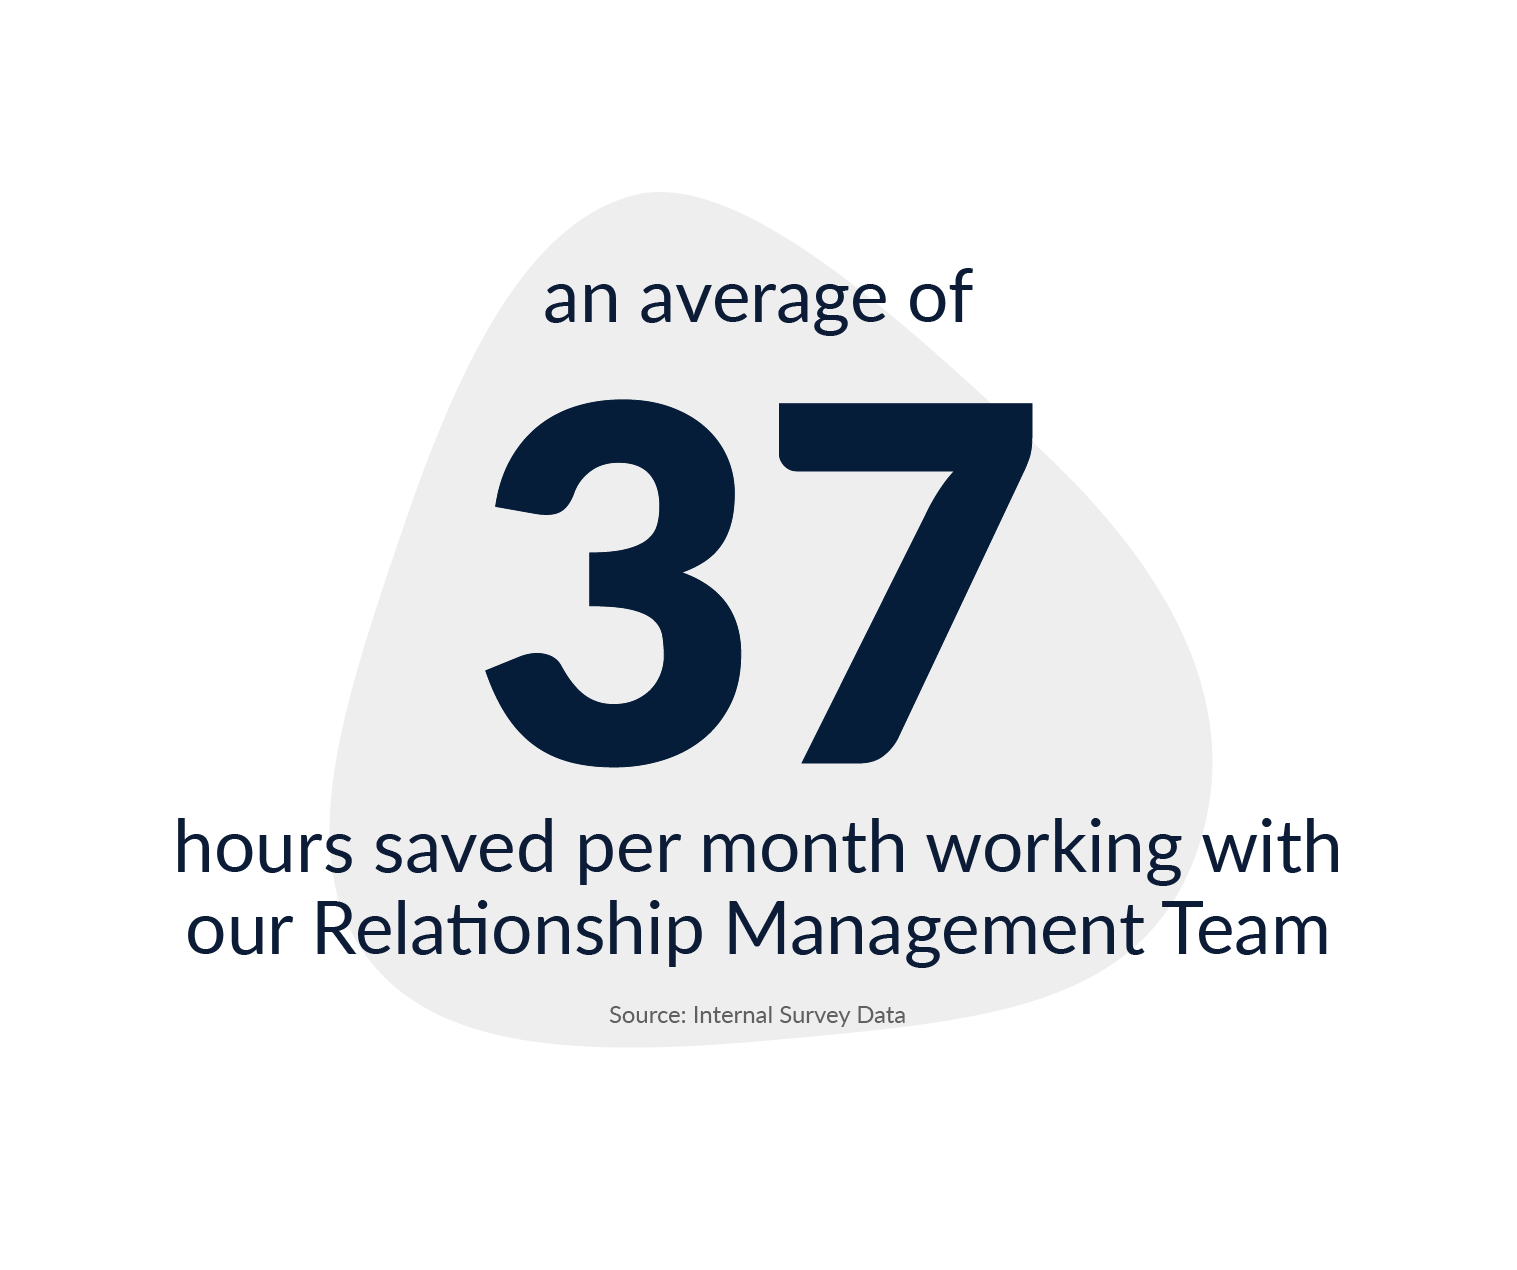 Statistic: an average of 37 hours saved per month working with Founders Relationship Management Team